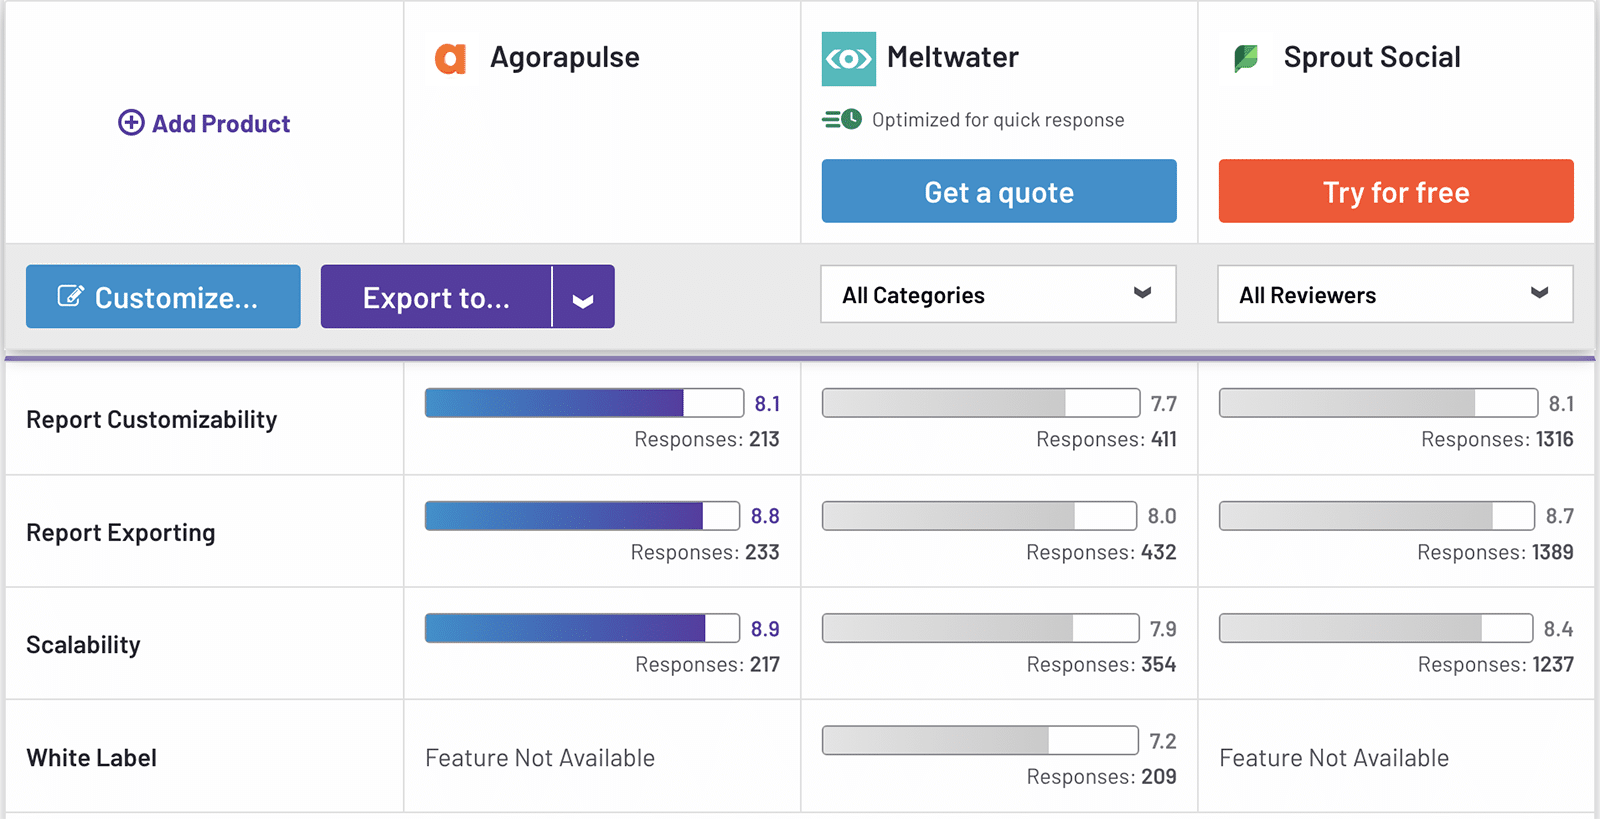 G2 comparison between Agorapulse, Meltwater, and Sprout Social showing reporting